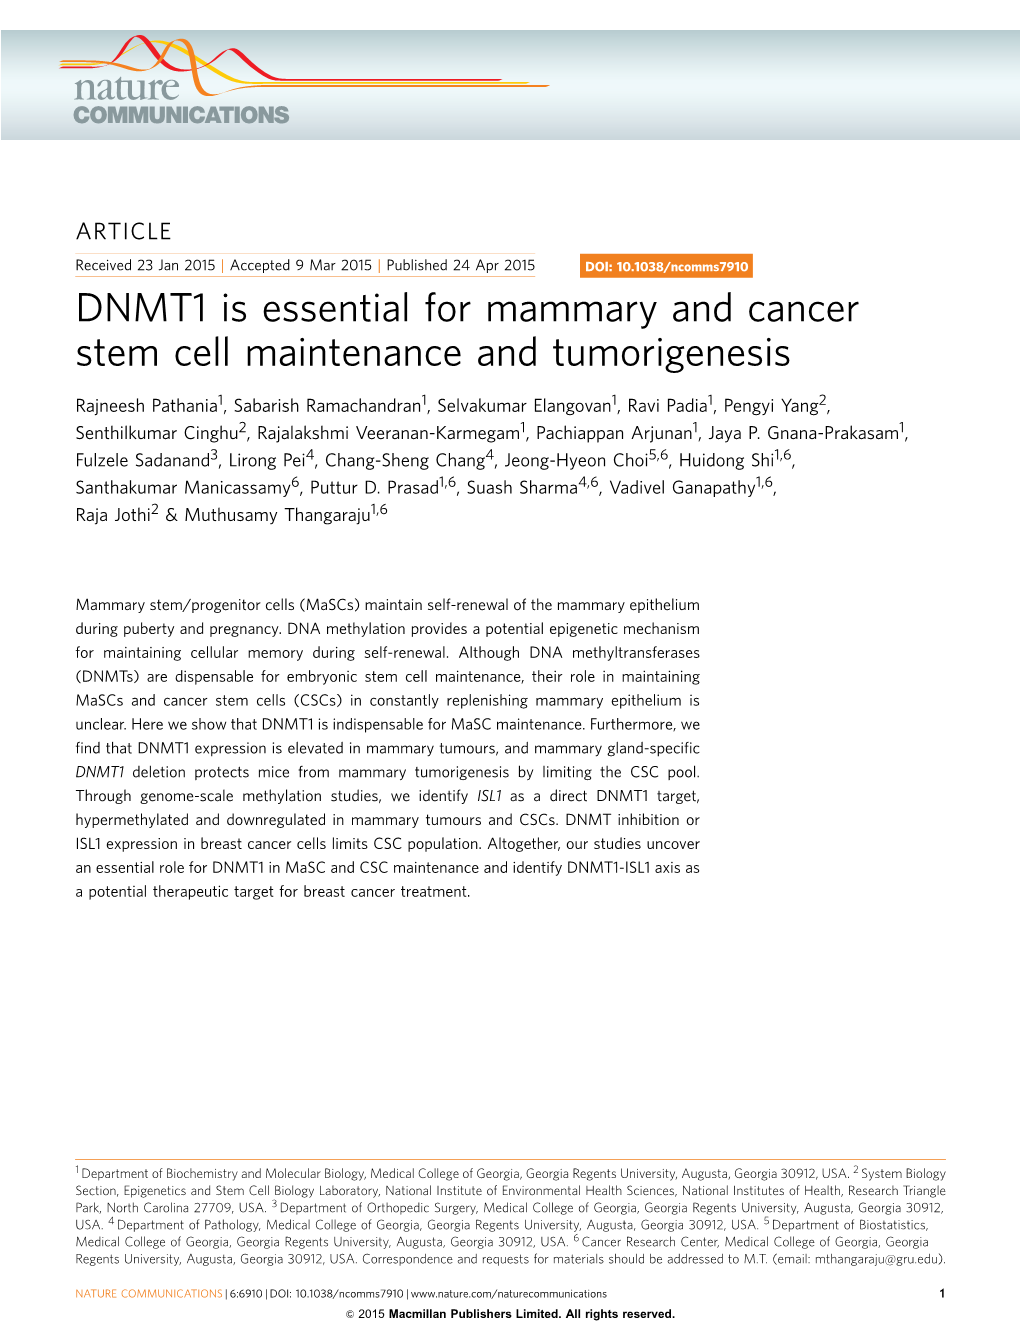 DNMT1 Is Essential for Mammary and Cancer Stem Cell Maintenance and Tumorigenesis